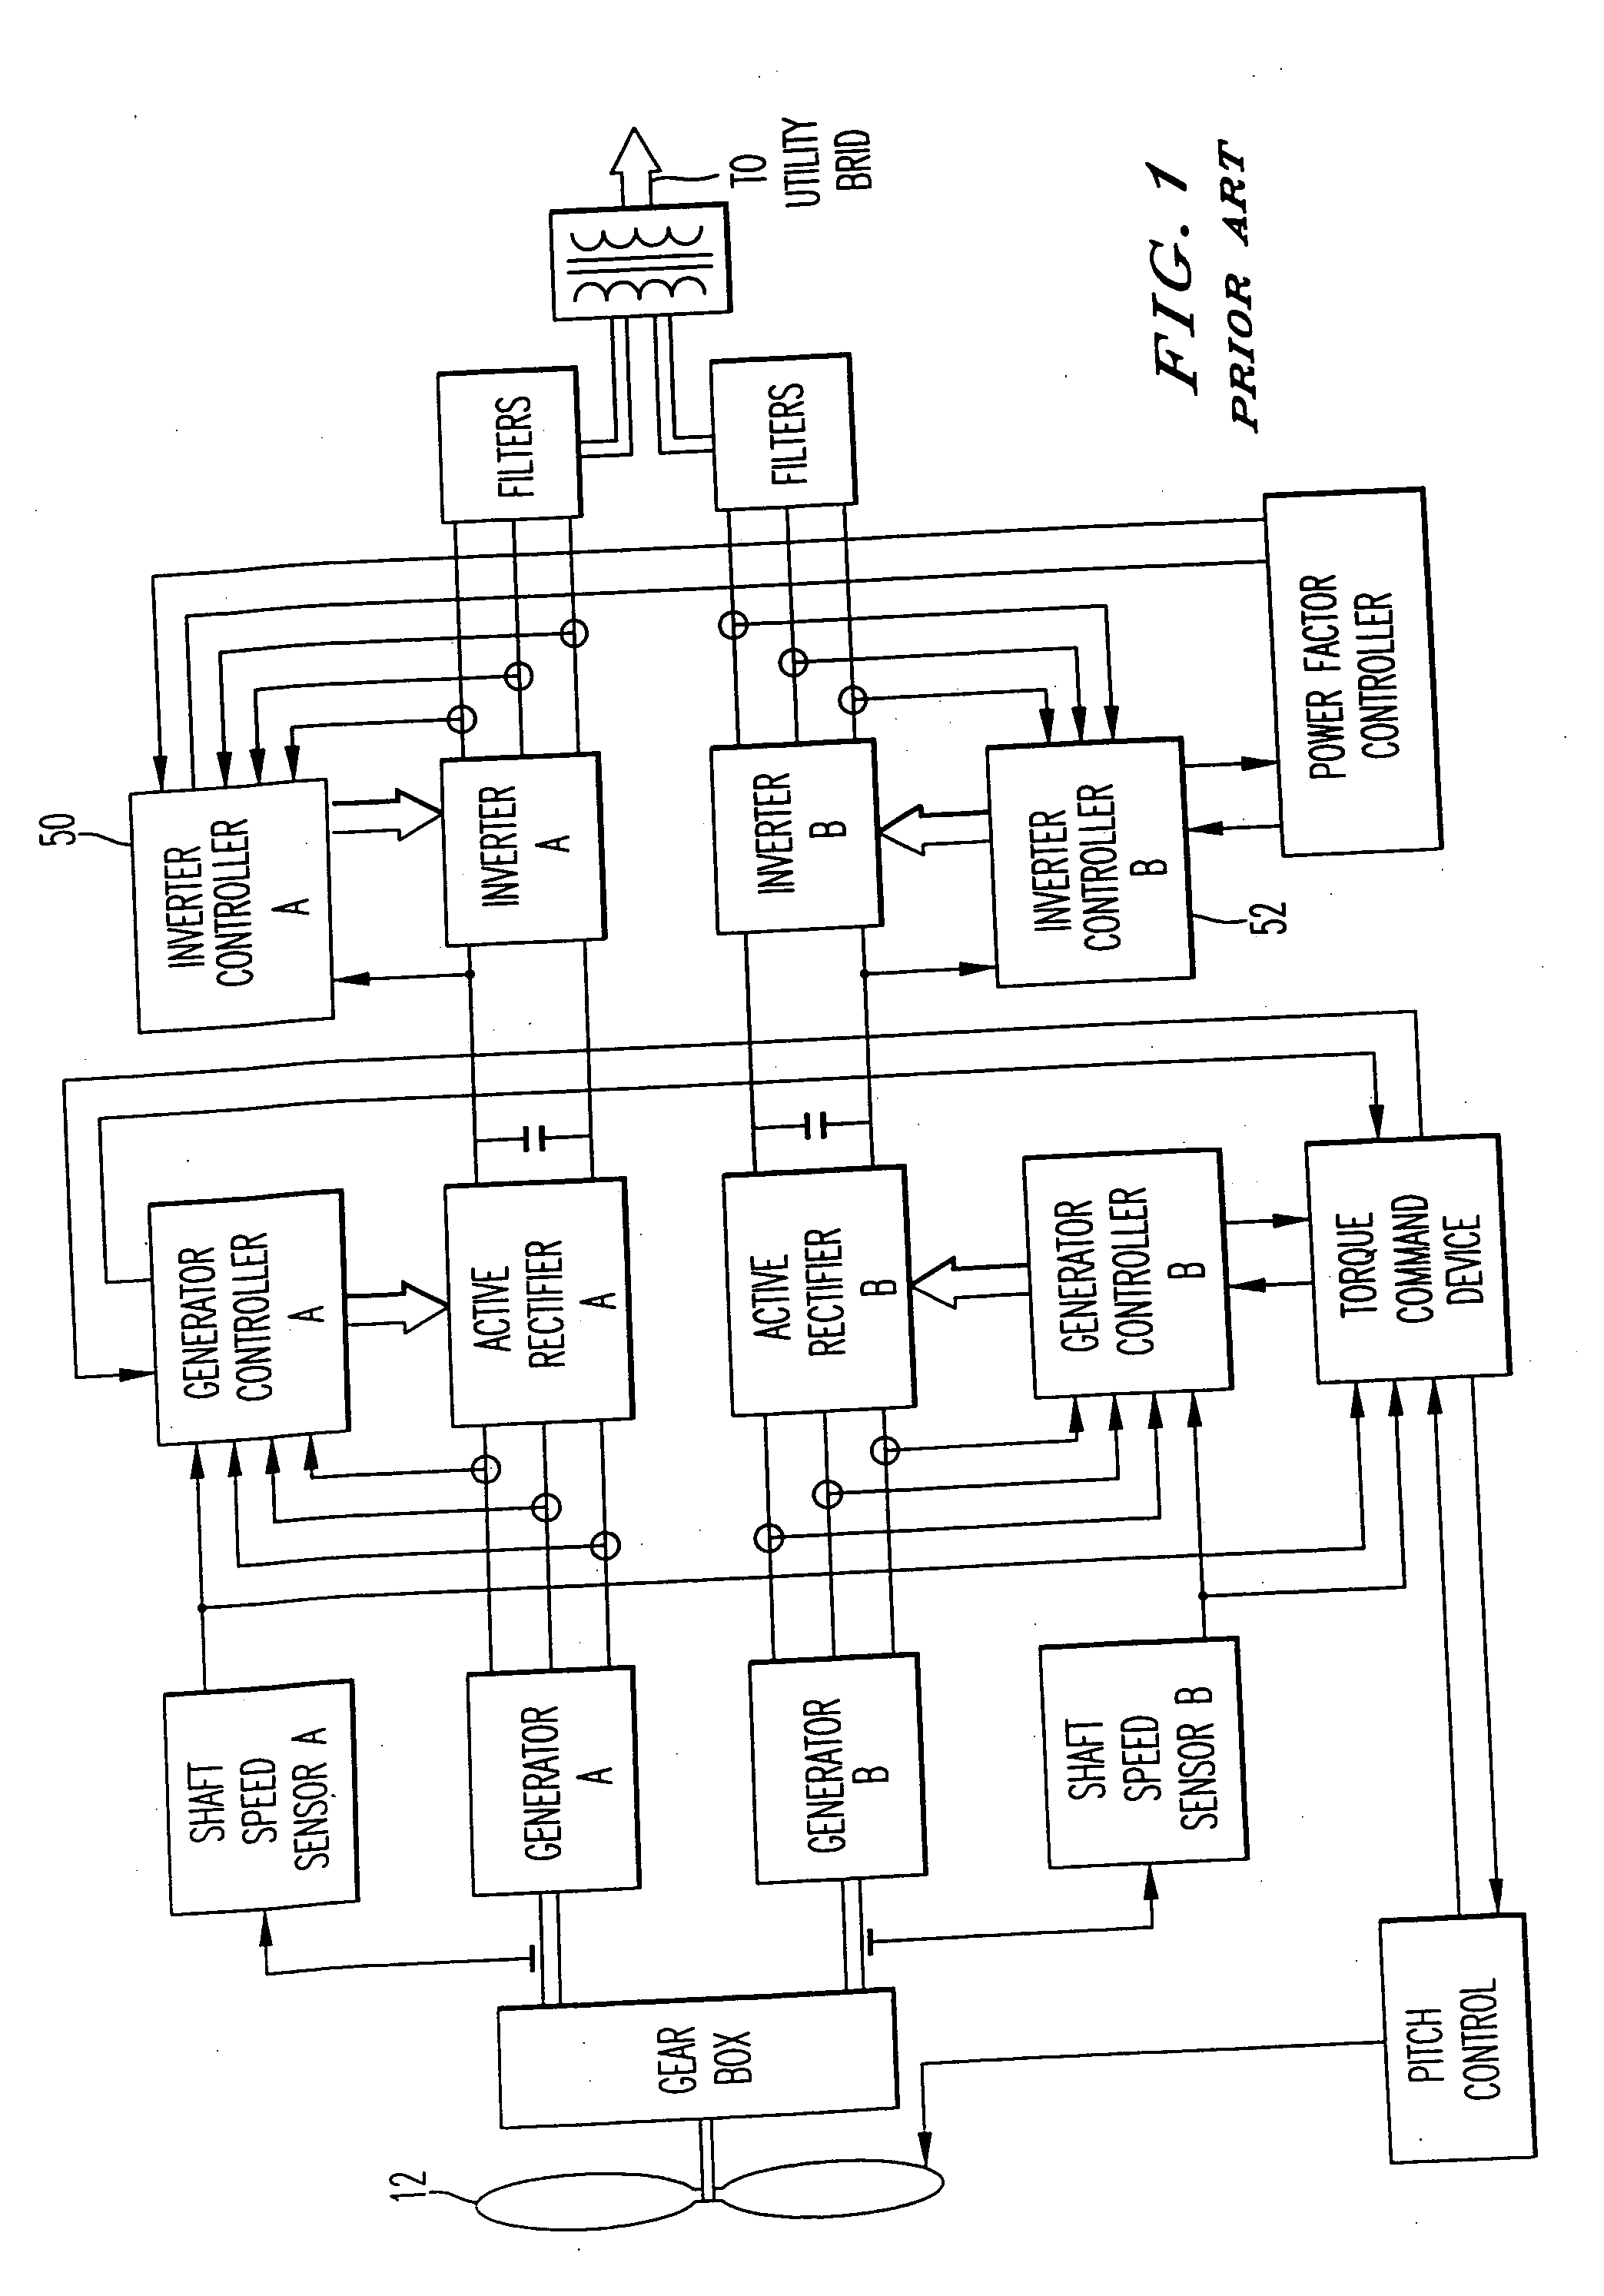 System, method and computer program product for enhancing commercial value of electrical power produced from a renewable energy power production facility